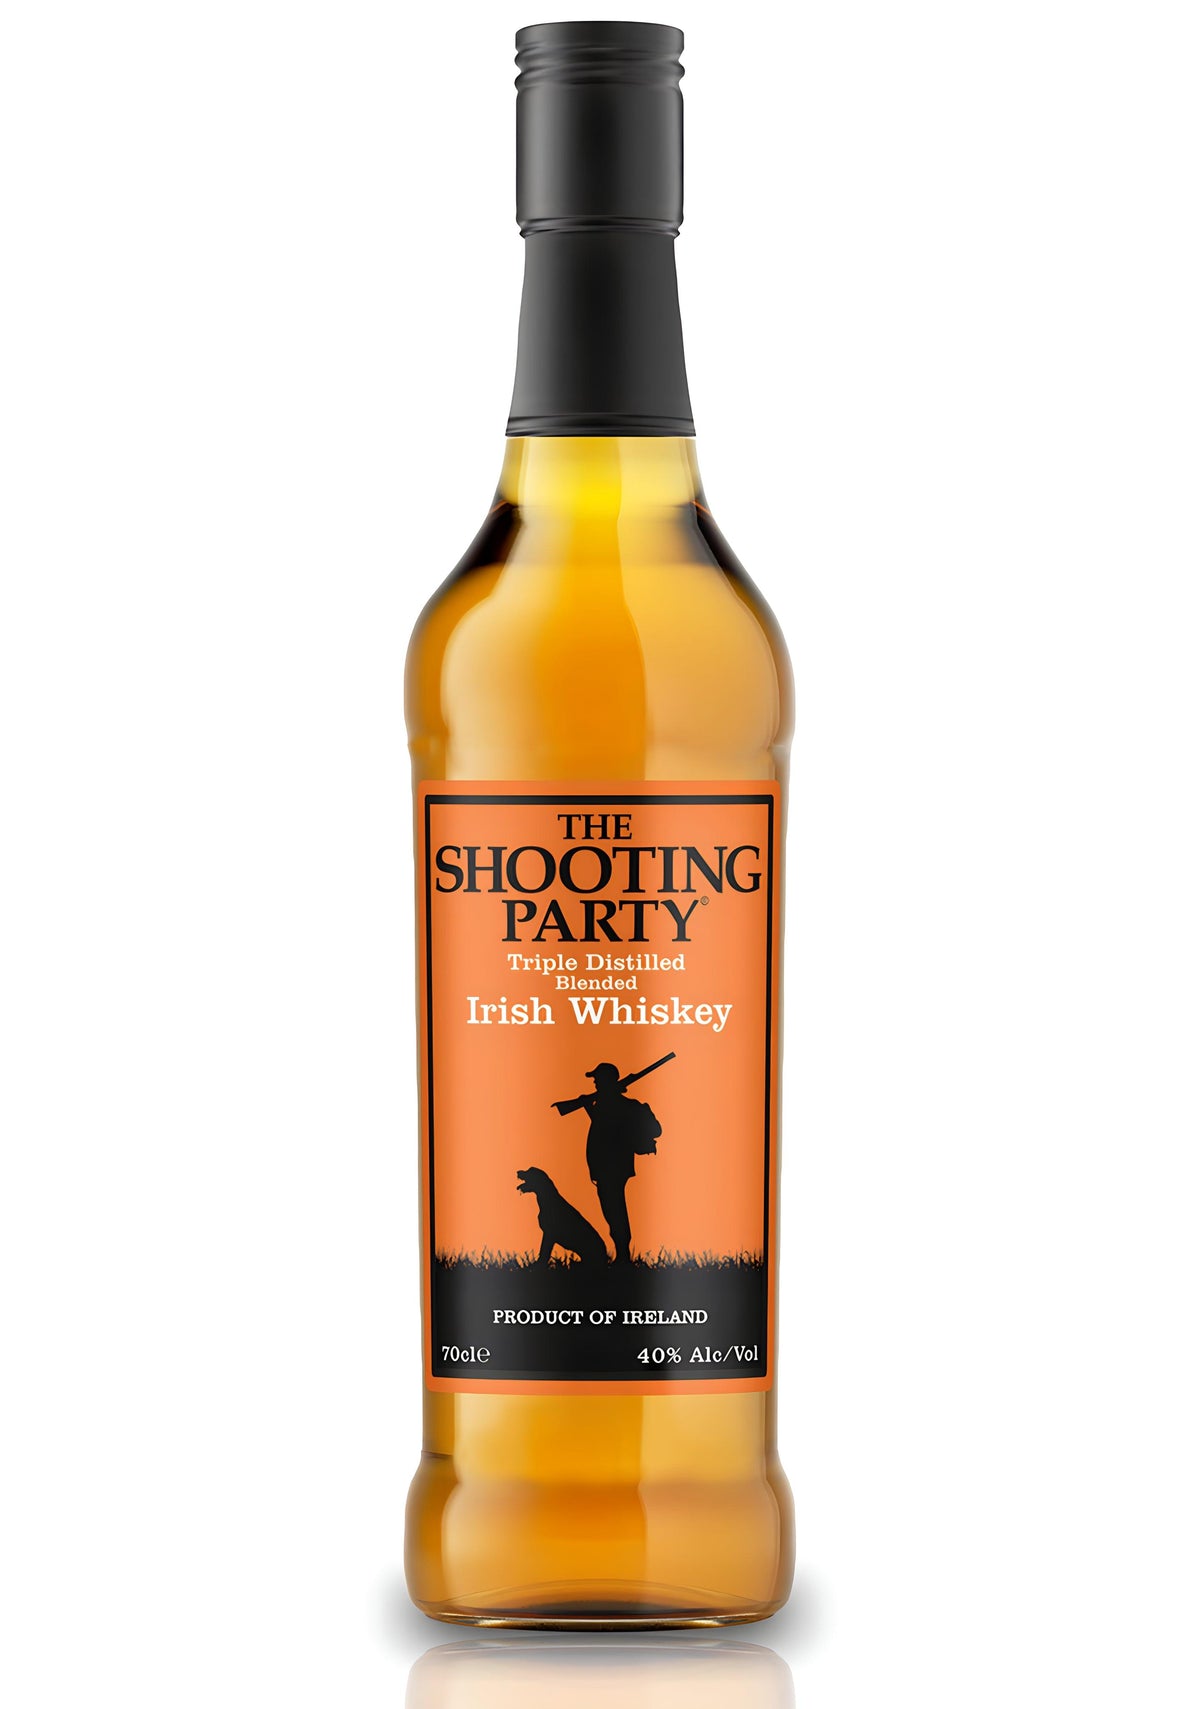 The Shooting Party Triple Distilled Blended Irish Whiskey - 700mL, 40% Alc. - The Wild Geese® Irish Premium Spirits Collection